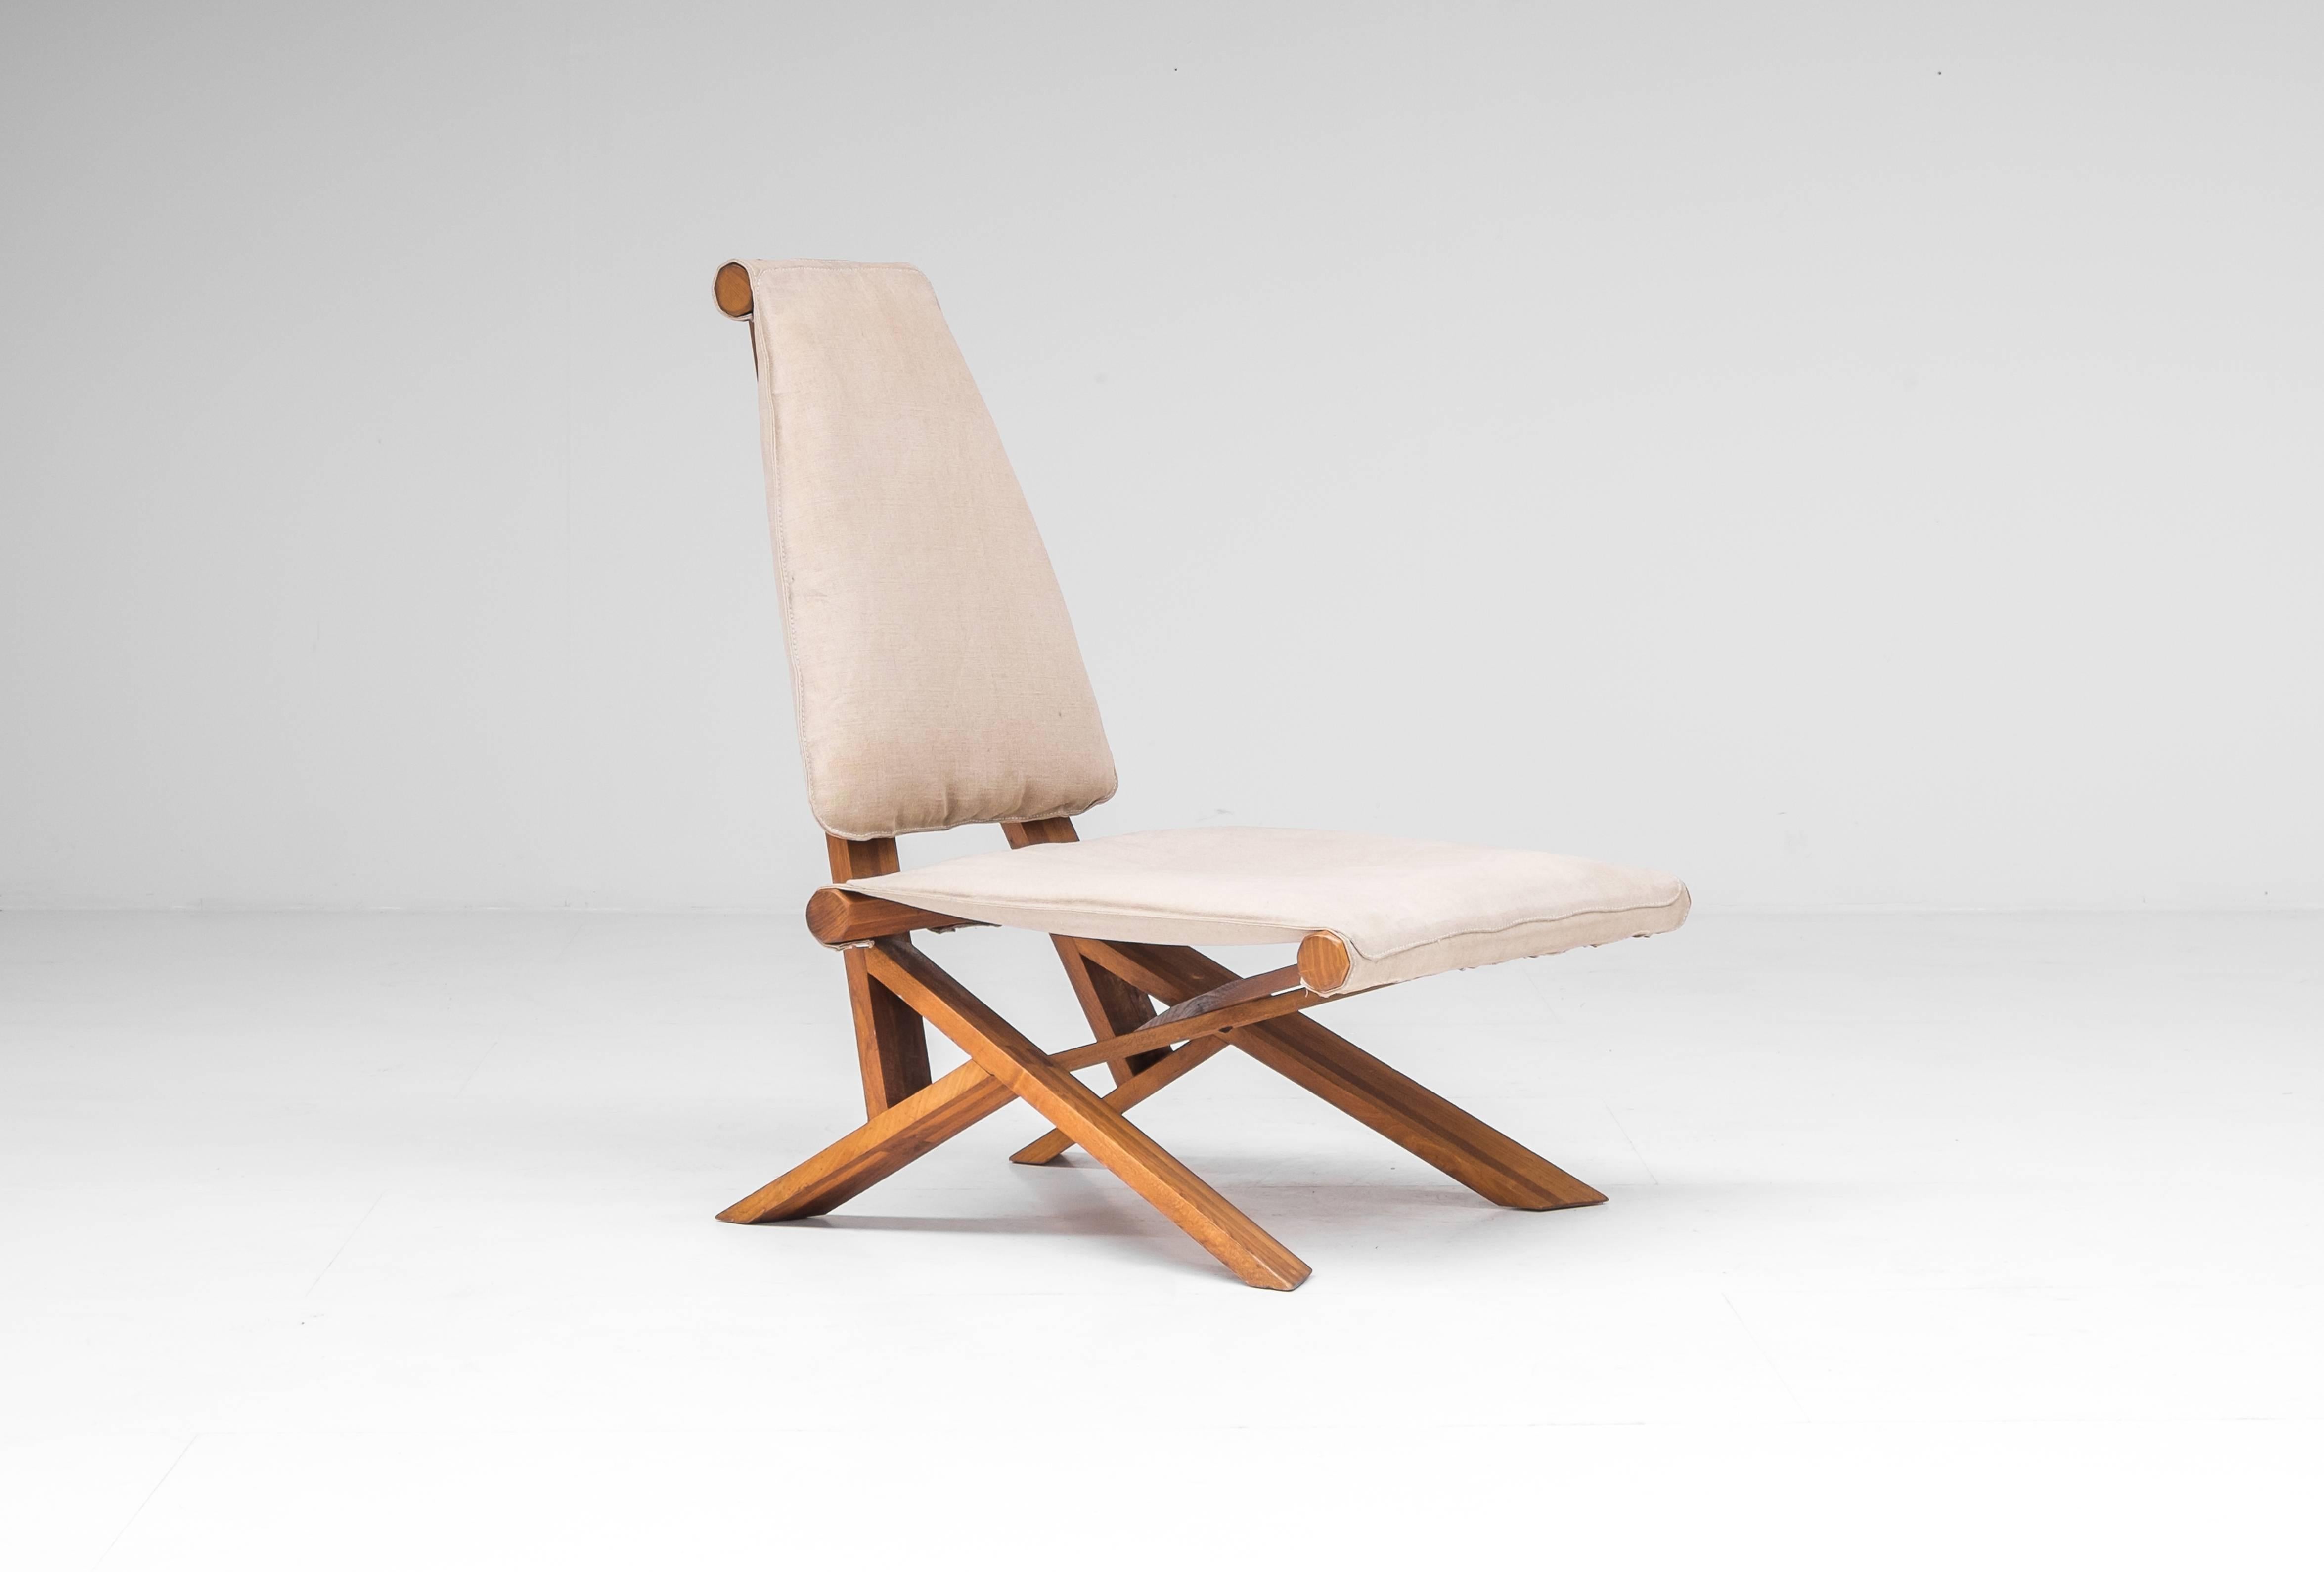 The S46 Dromadaire chair was designed by Pierre Chapo and was produced in France by Ebenisterie Seltz, circa 1980. The frame is made from elm with a canvas upholstery. The weight and shape of the structure of this piece determine its equilibrium and